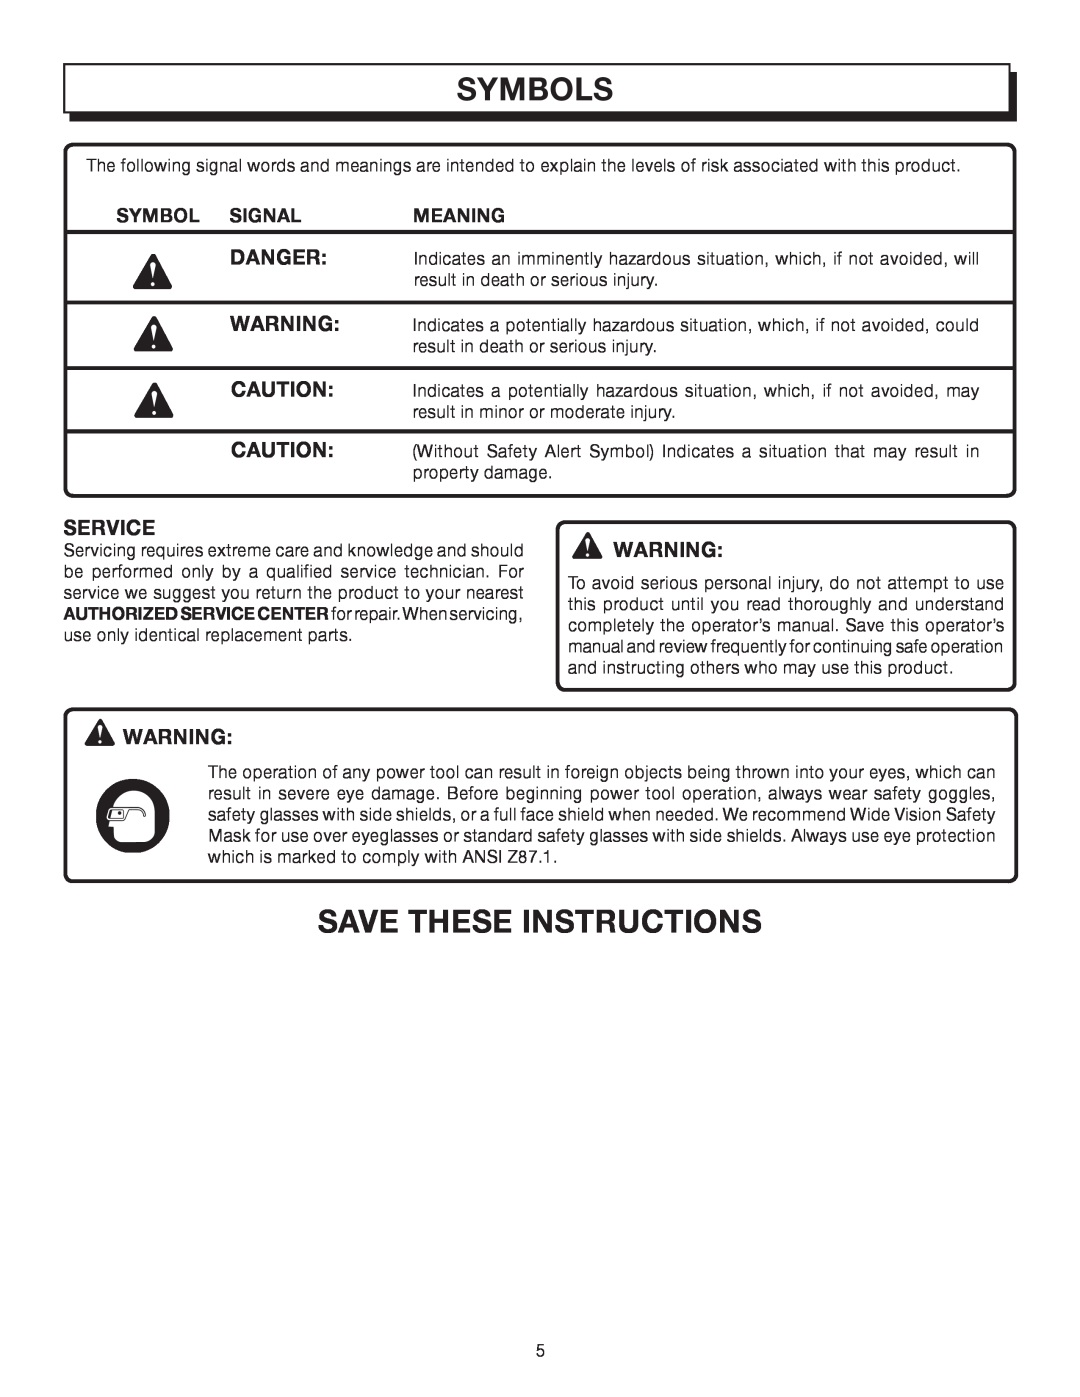 Homelite UT08572A manual Save These Instructions, Symbols, Service, Symbol Signal, Meaning 